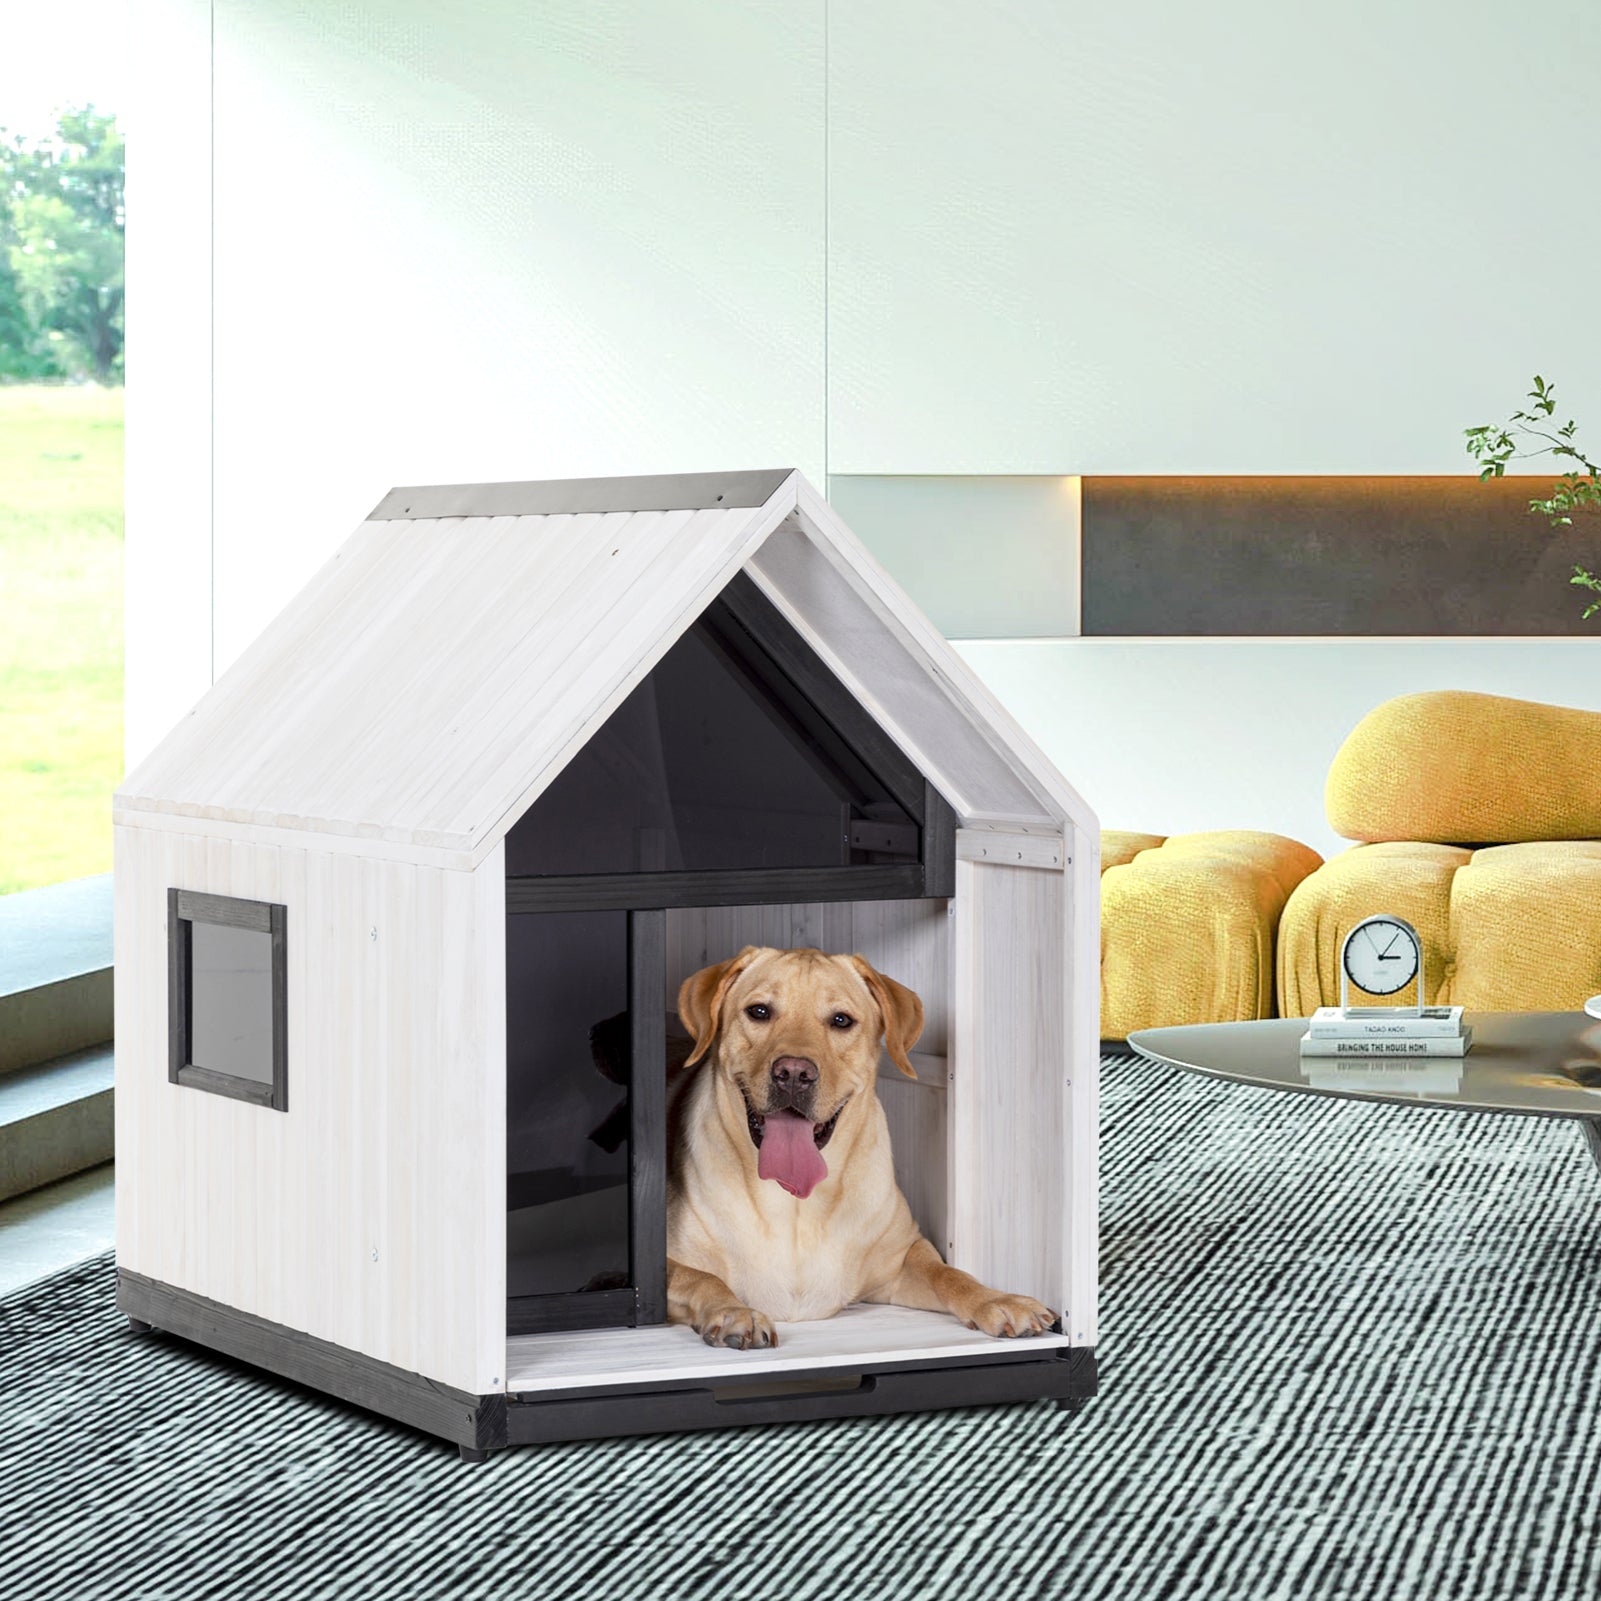 Outdoor Dog House Sun Protection for Small Medium Large Sized Dogs, Weatherproof with Slide Out Floor for Easy Cleaning